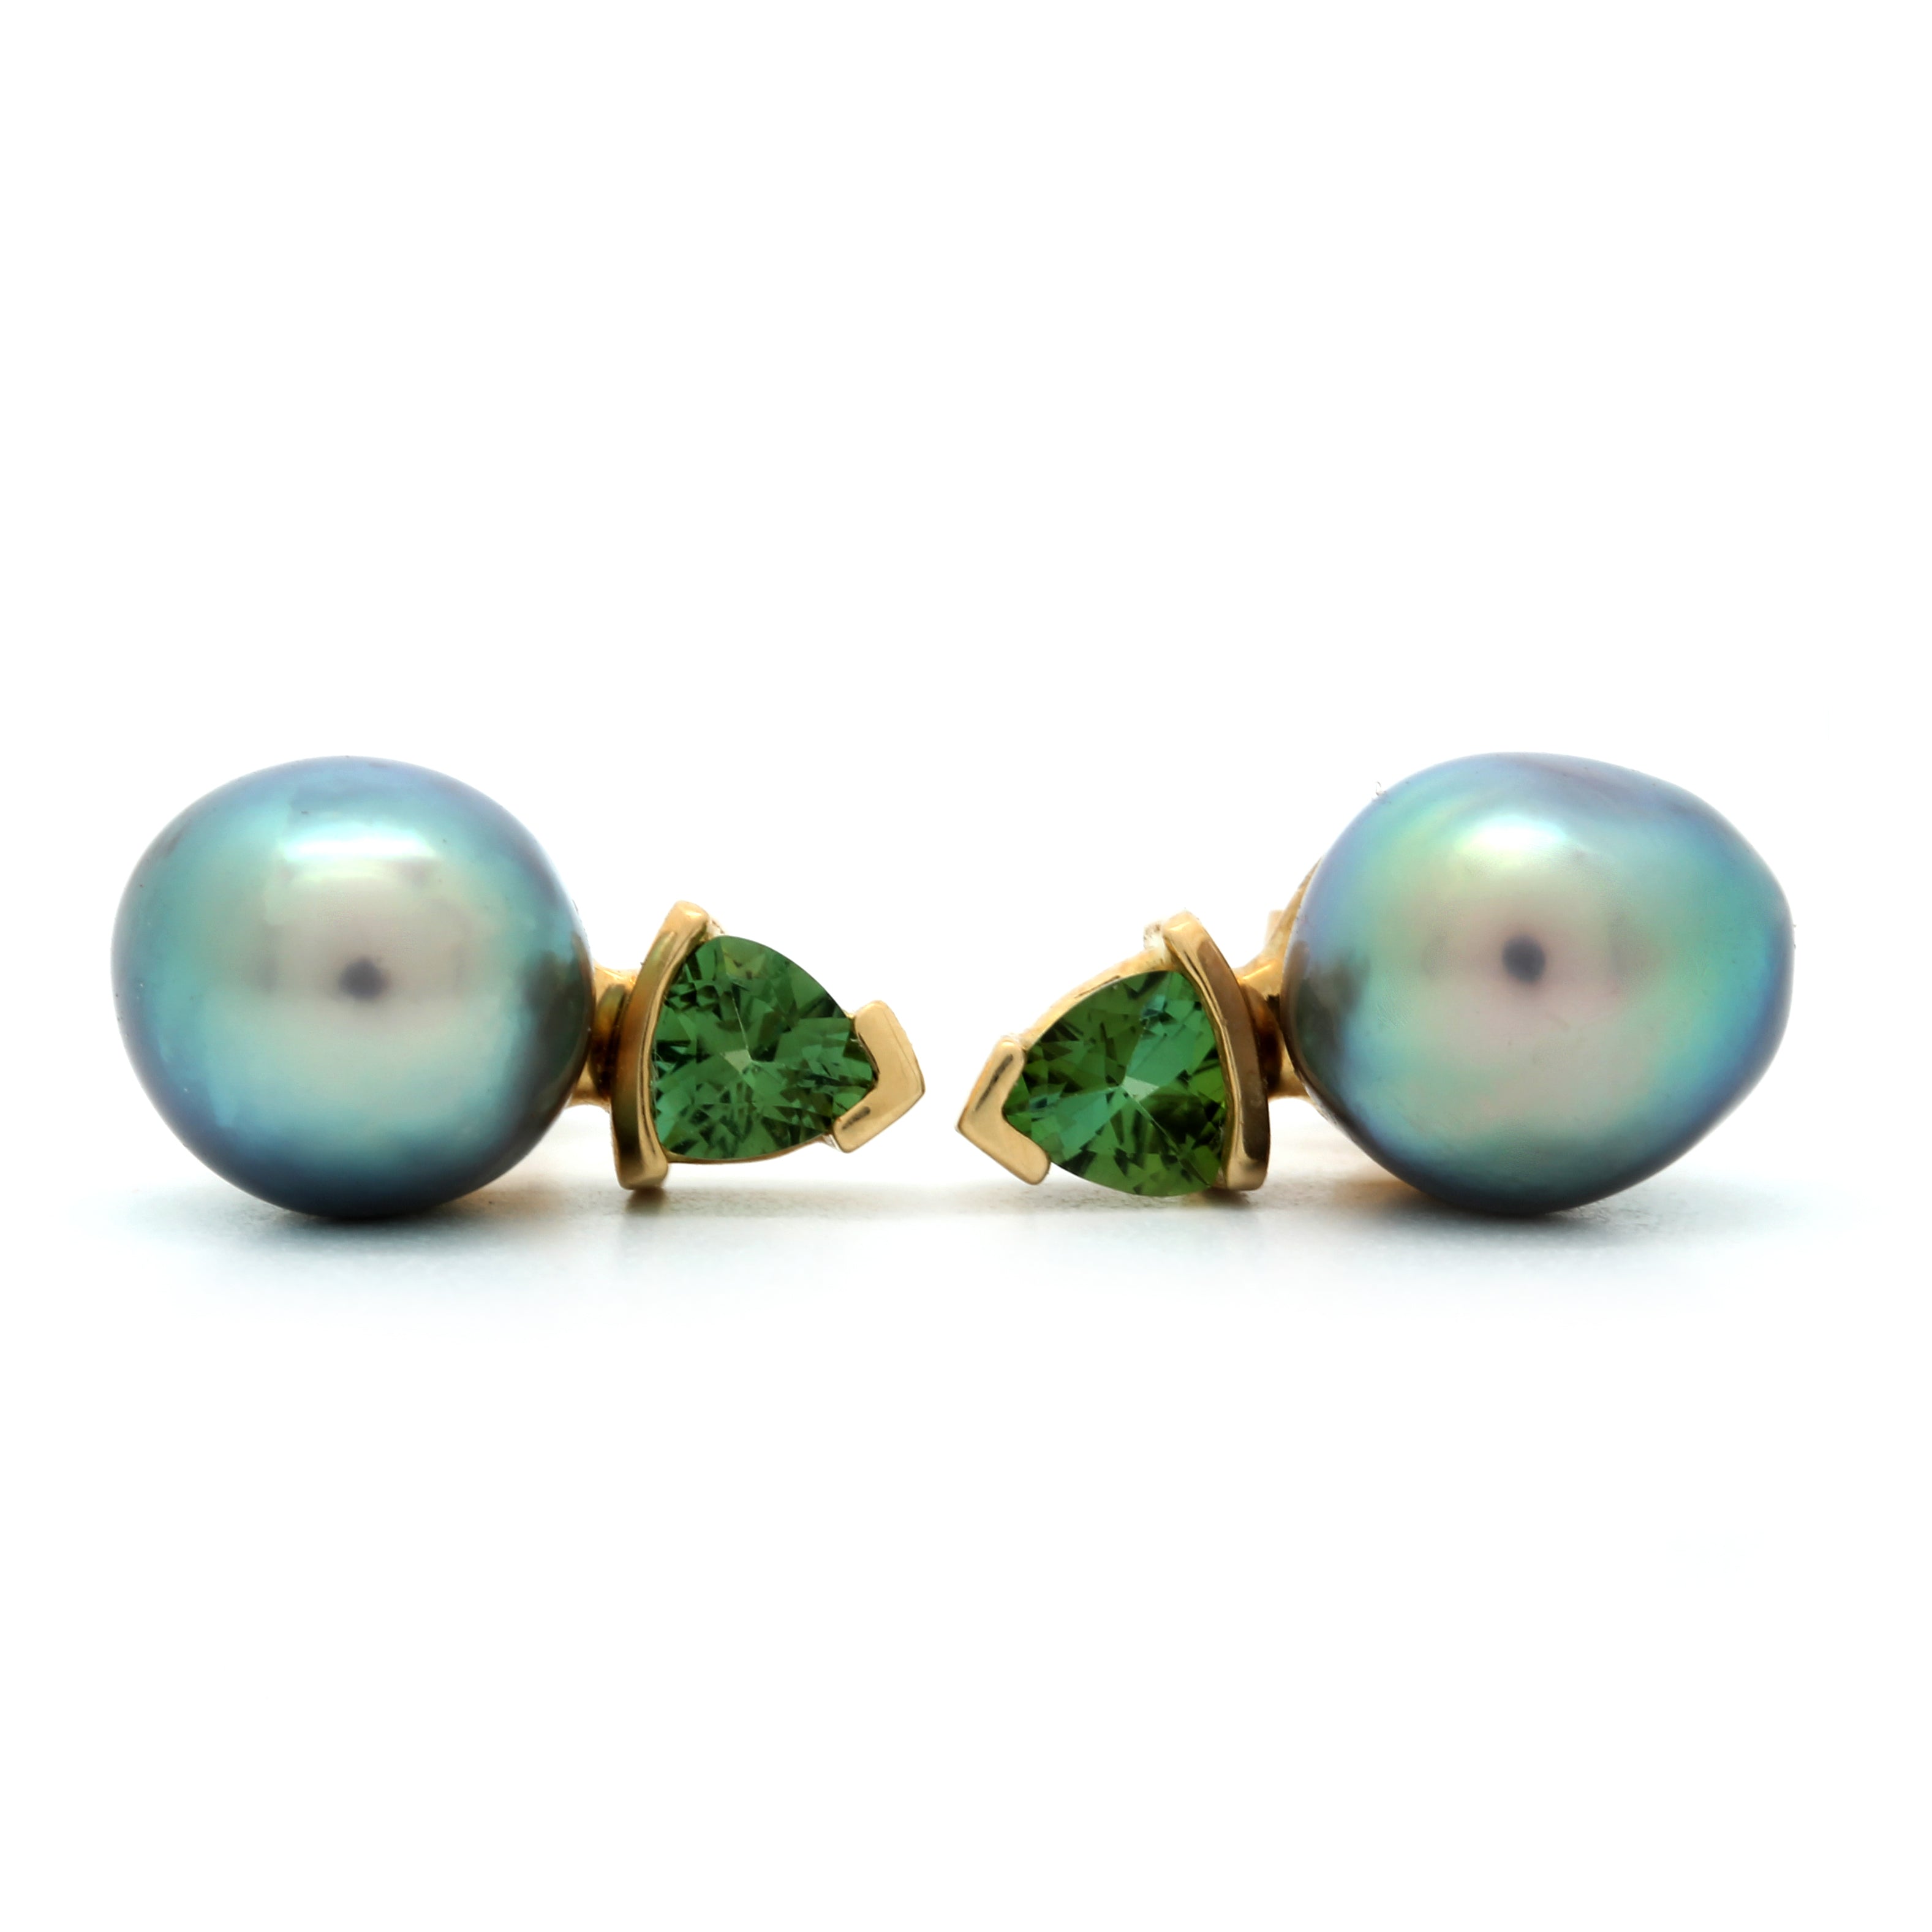 18K Yellow Gold Earrings with Cortez Pearls and Green Tourmalines